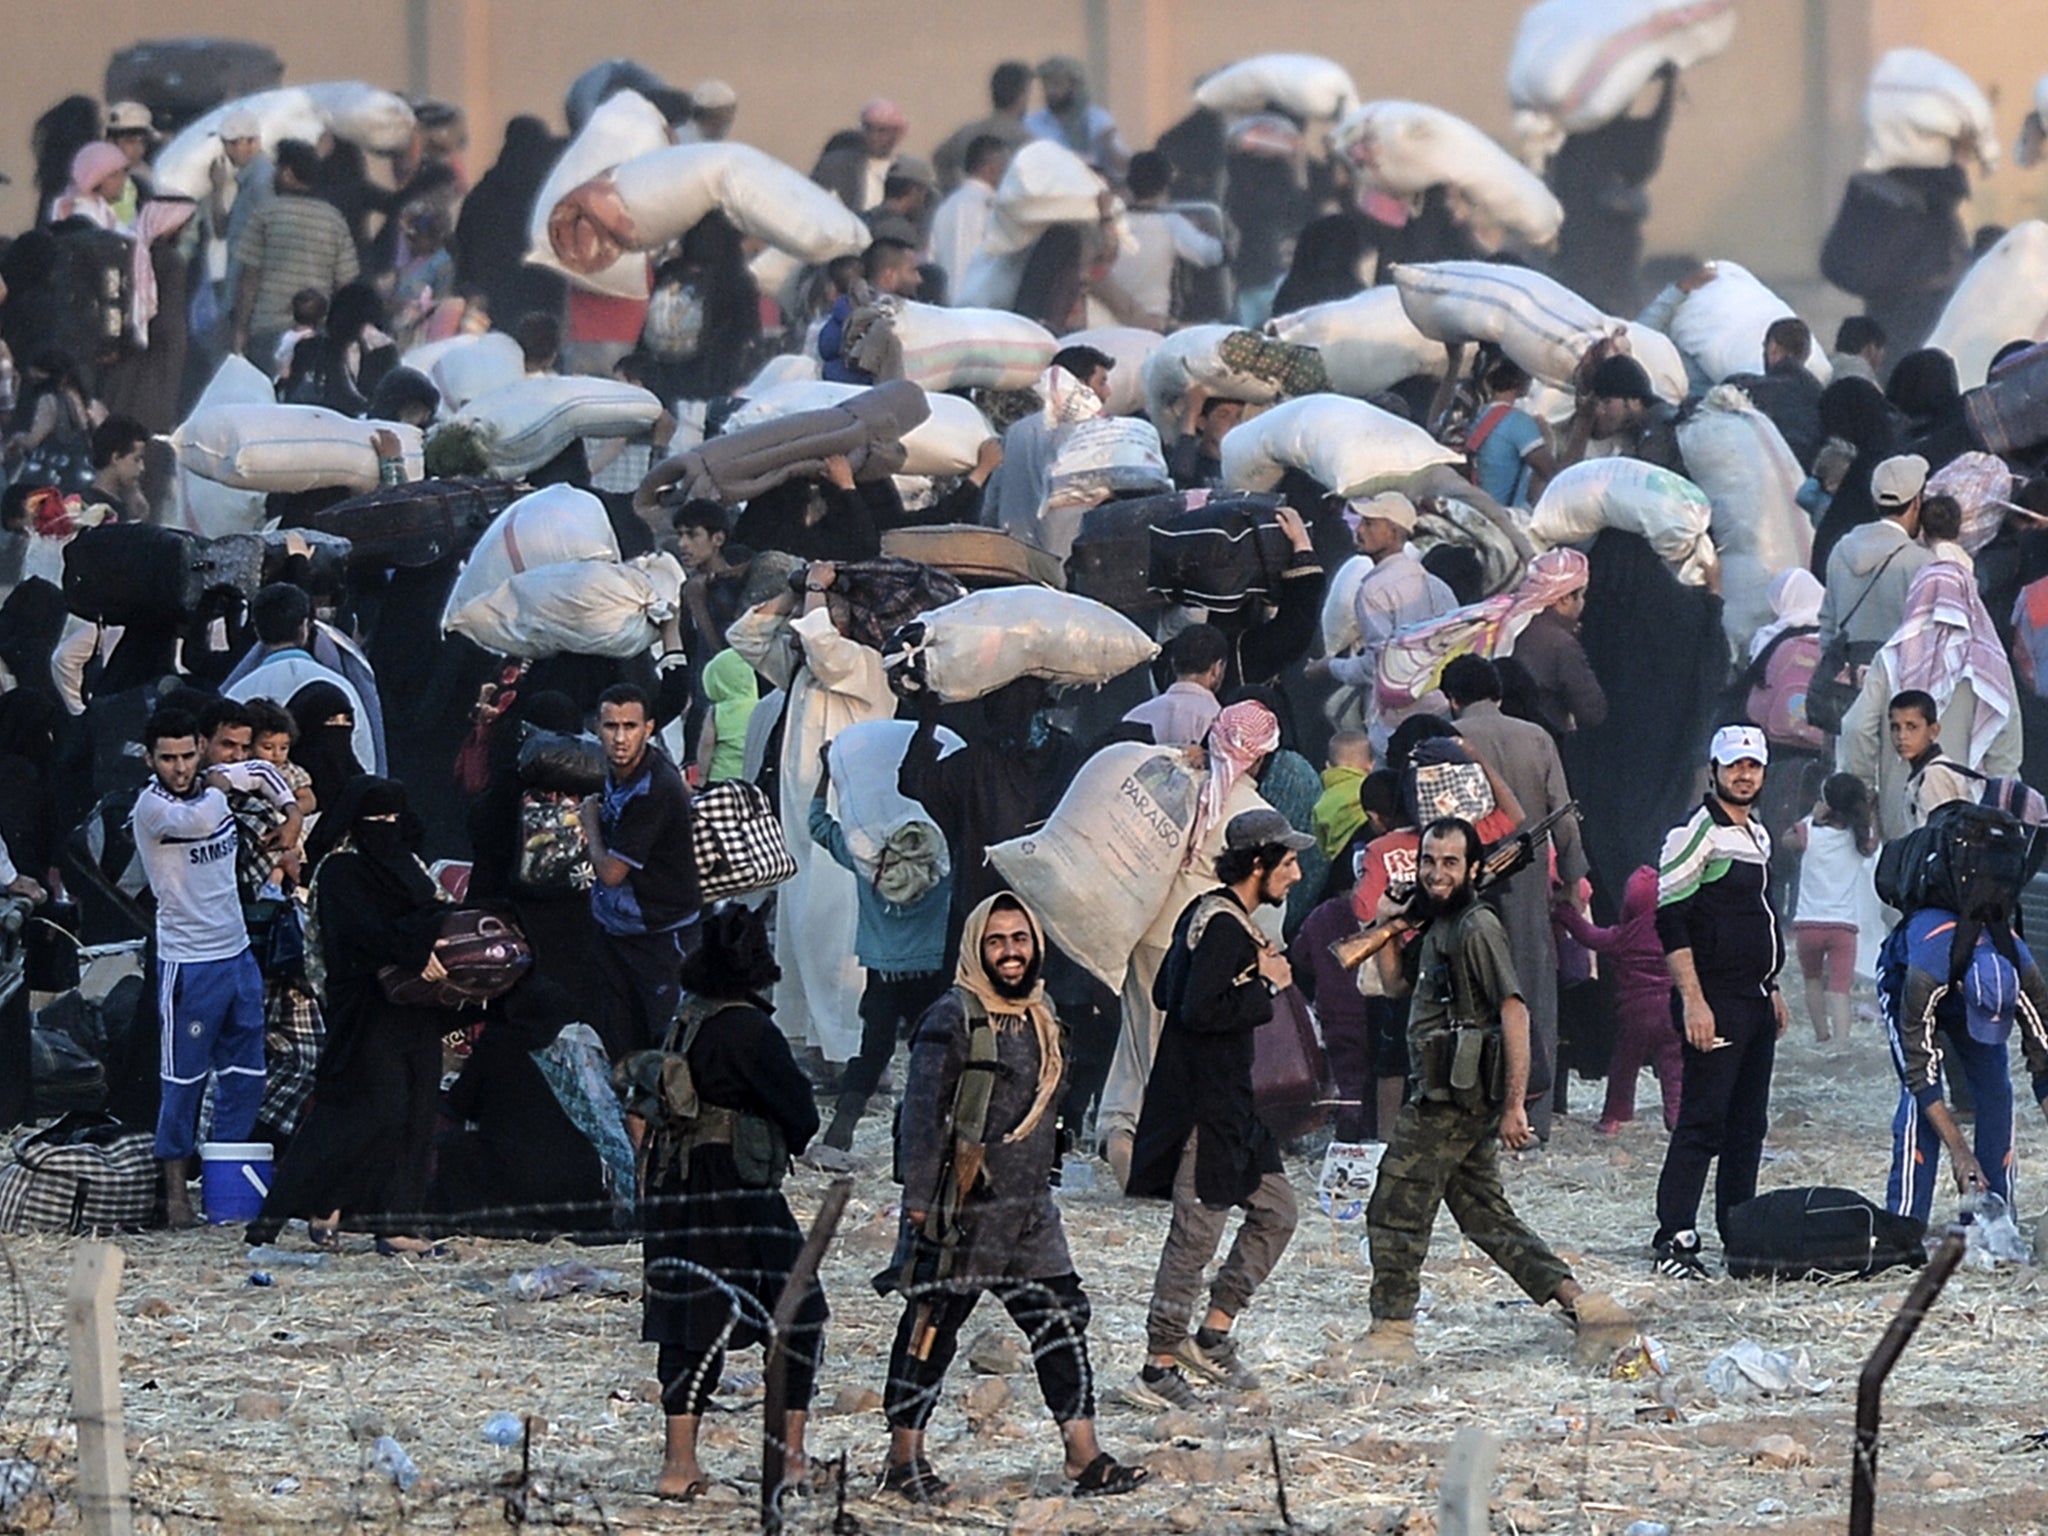 Isis fighters tried to prevent thousands of Syrians fleeing Tal Abyad crossing into Turkey